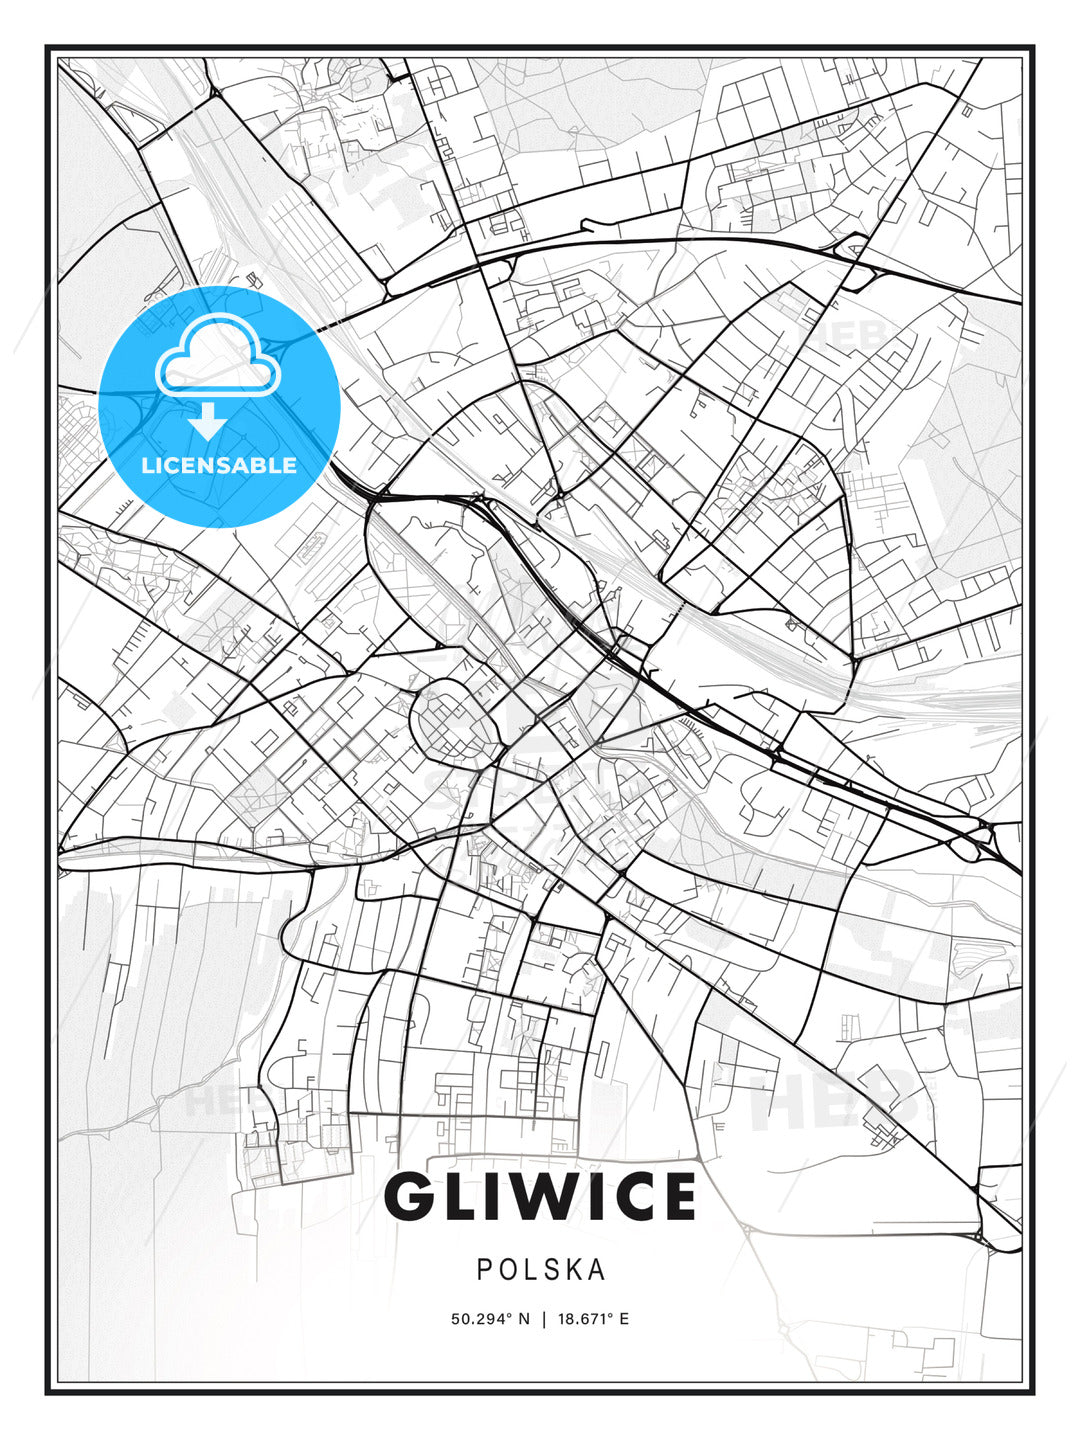 Gliwice, Poland, Modern Print Template in Various Formats - HEBSTREITS Sketches